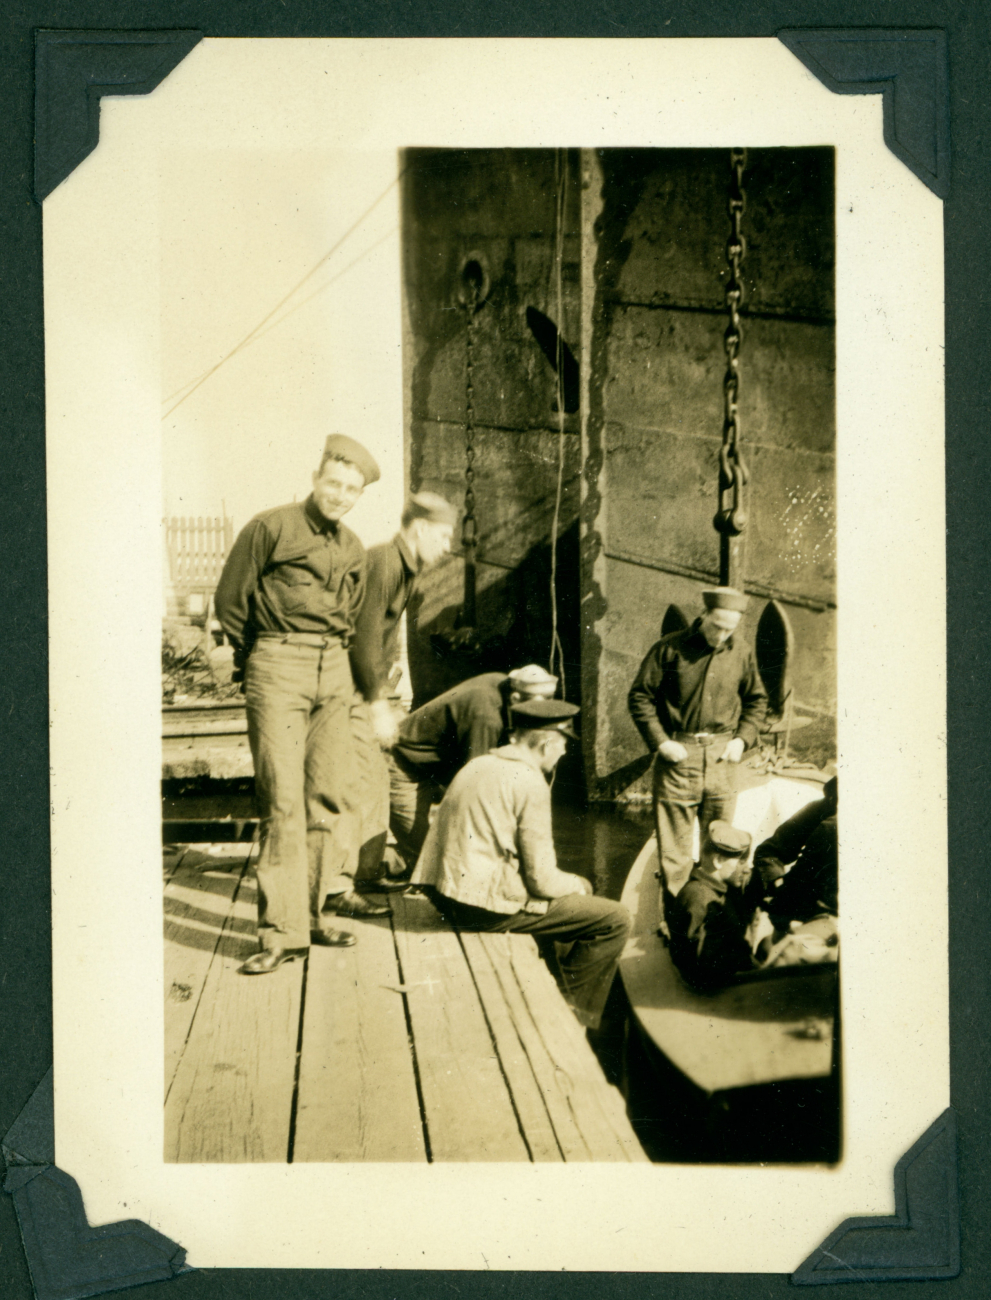 Unidentified officer candidates performing deck maintenance duties